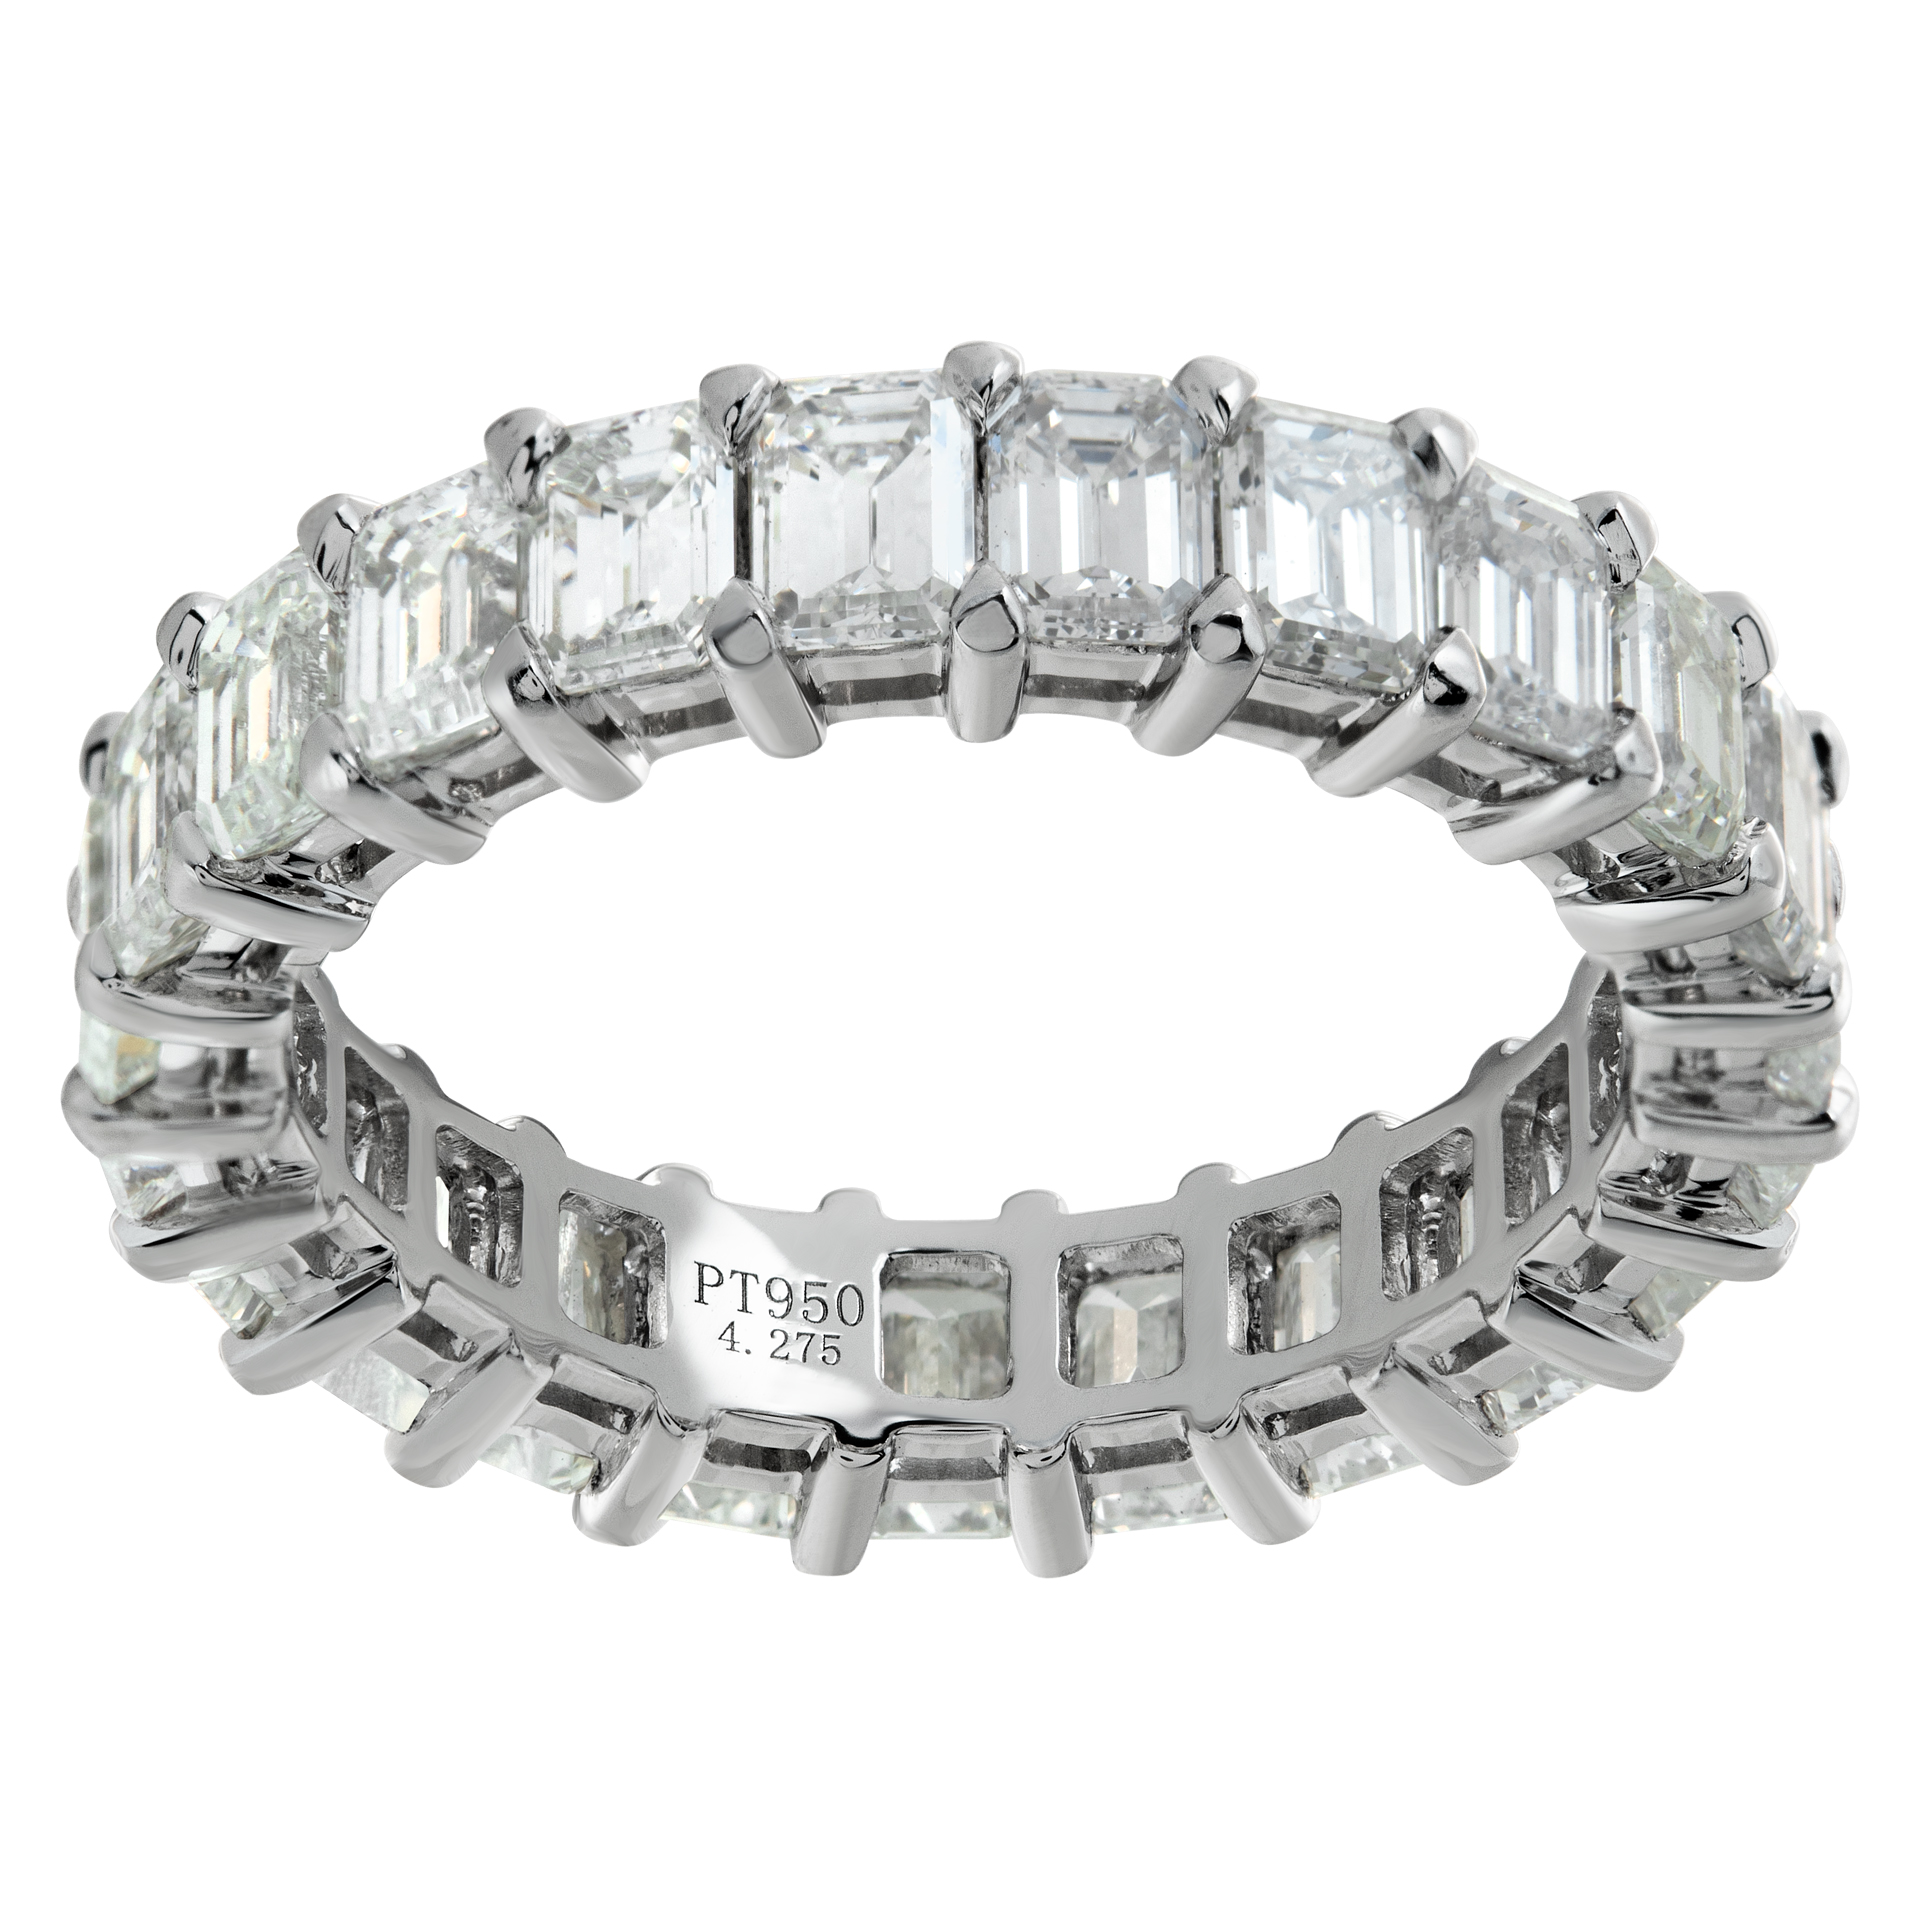 Emerald cut diamond eternity band 4.25 carats in G-H color, VS clarity image 1